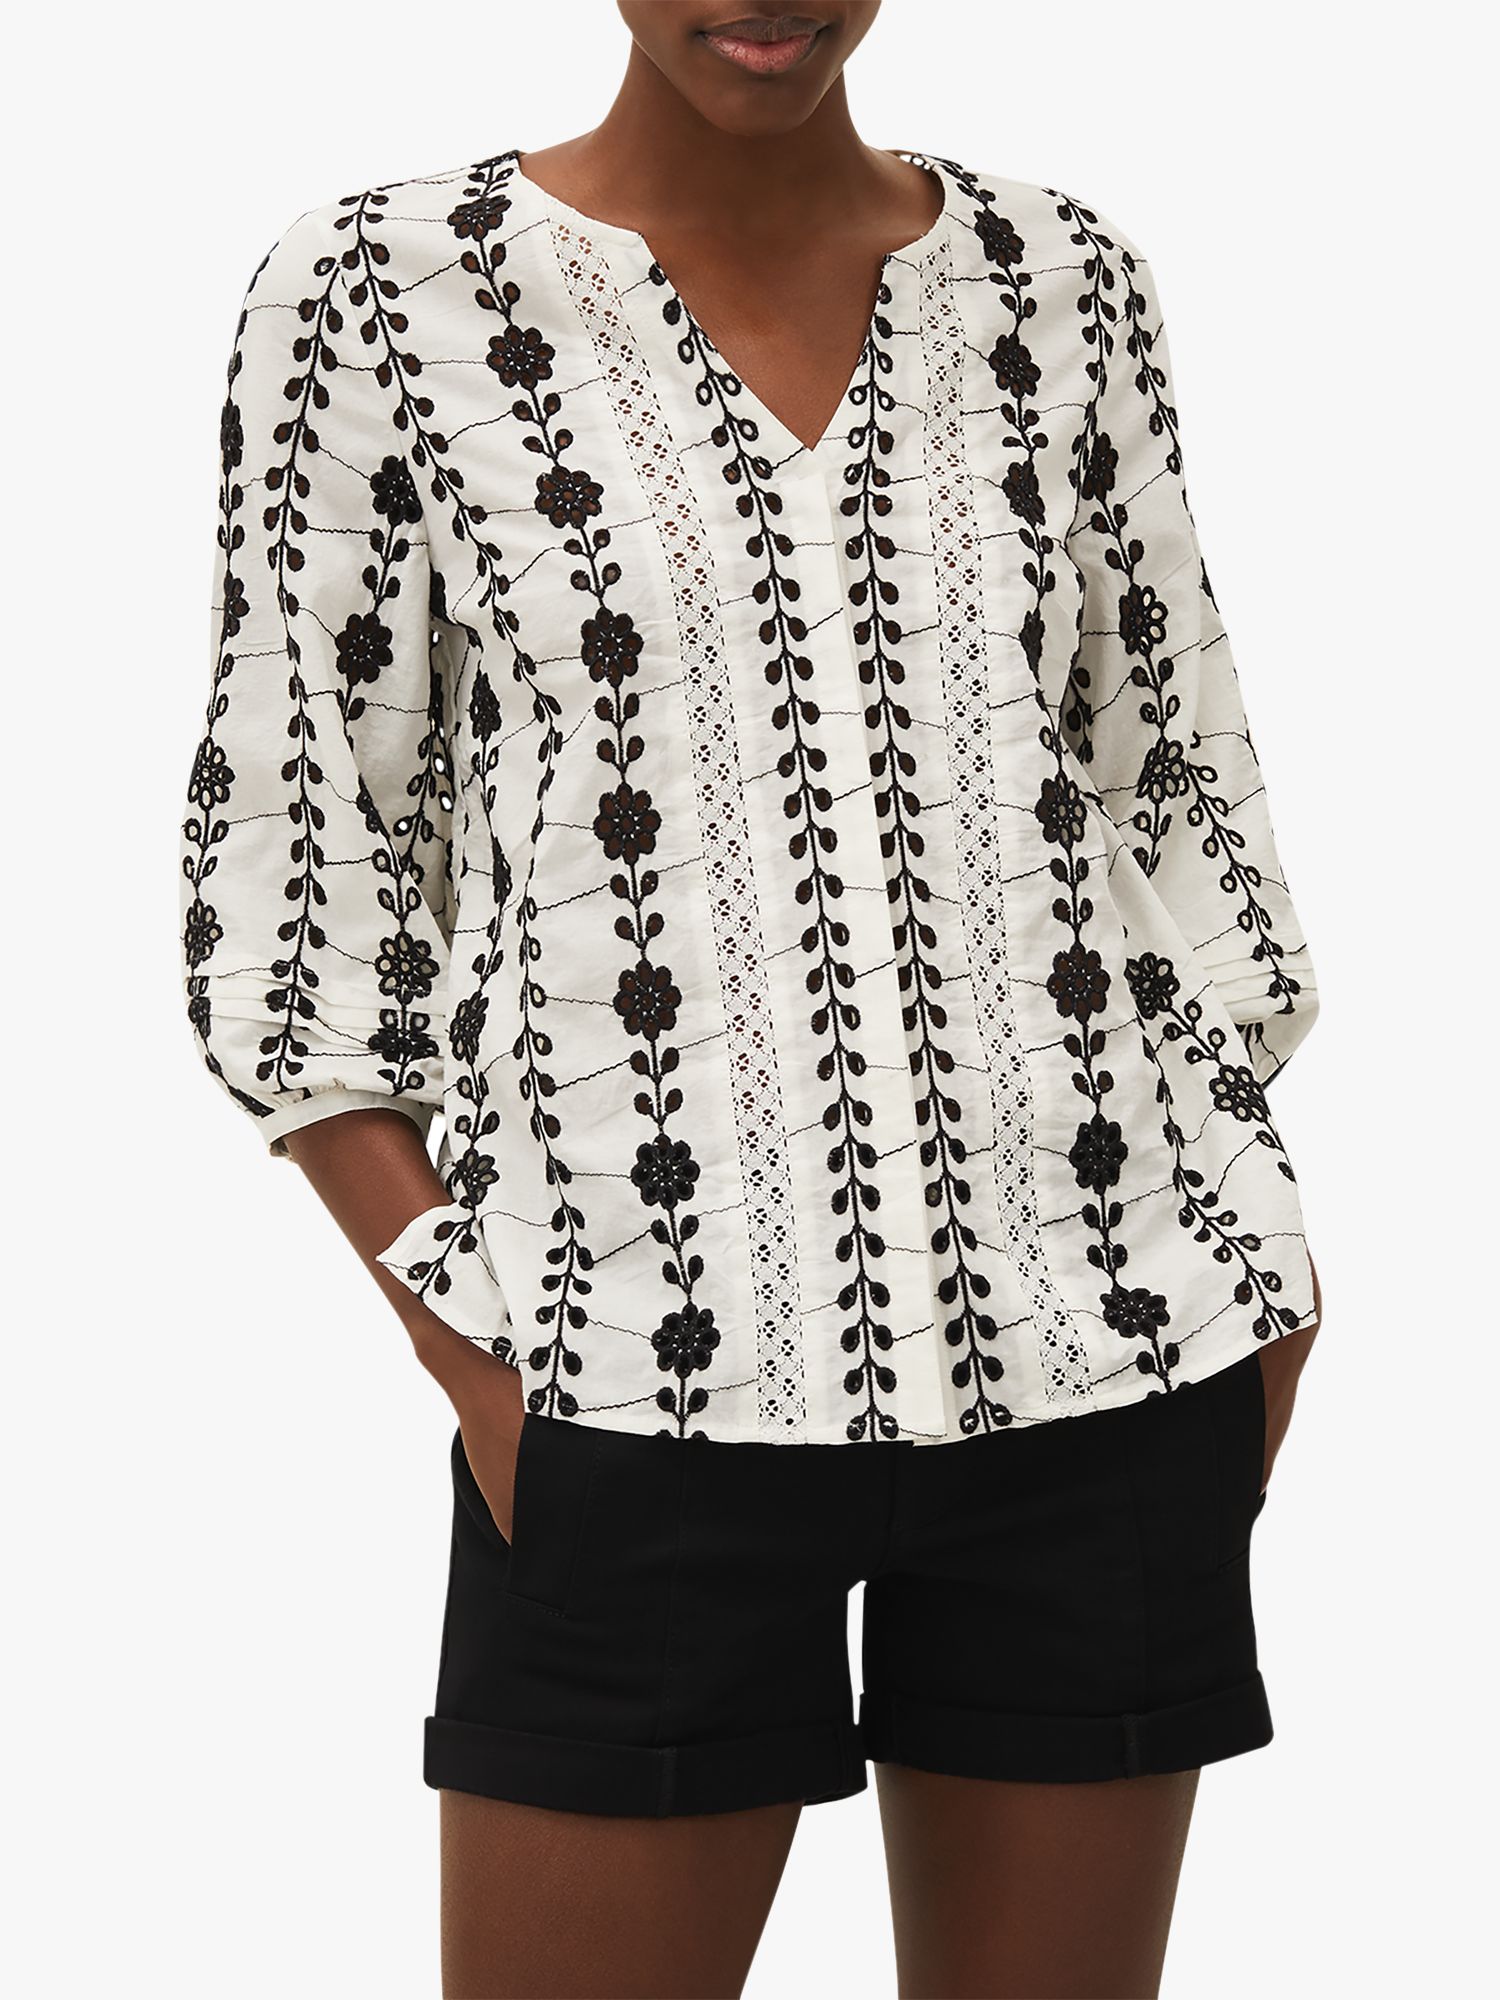 Phase Eight Caela Floral Broderie Blouse, White/Black